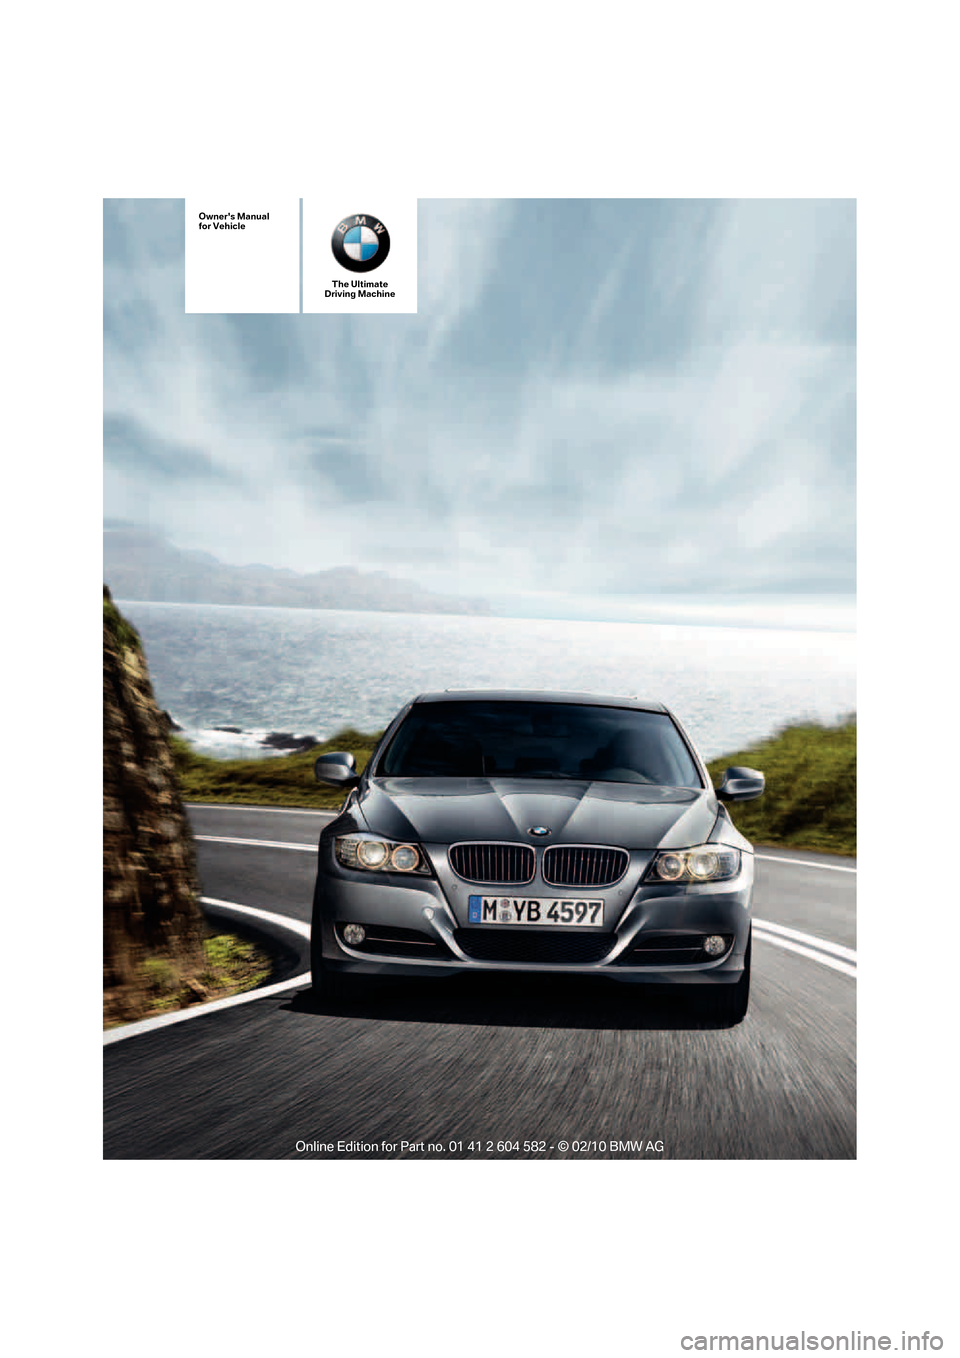 BMW 323I 2011 E90 Owners Manual The Ultimate
Driving Machine
Owners Manual
for Vehicle 